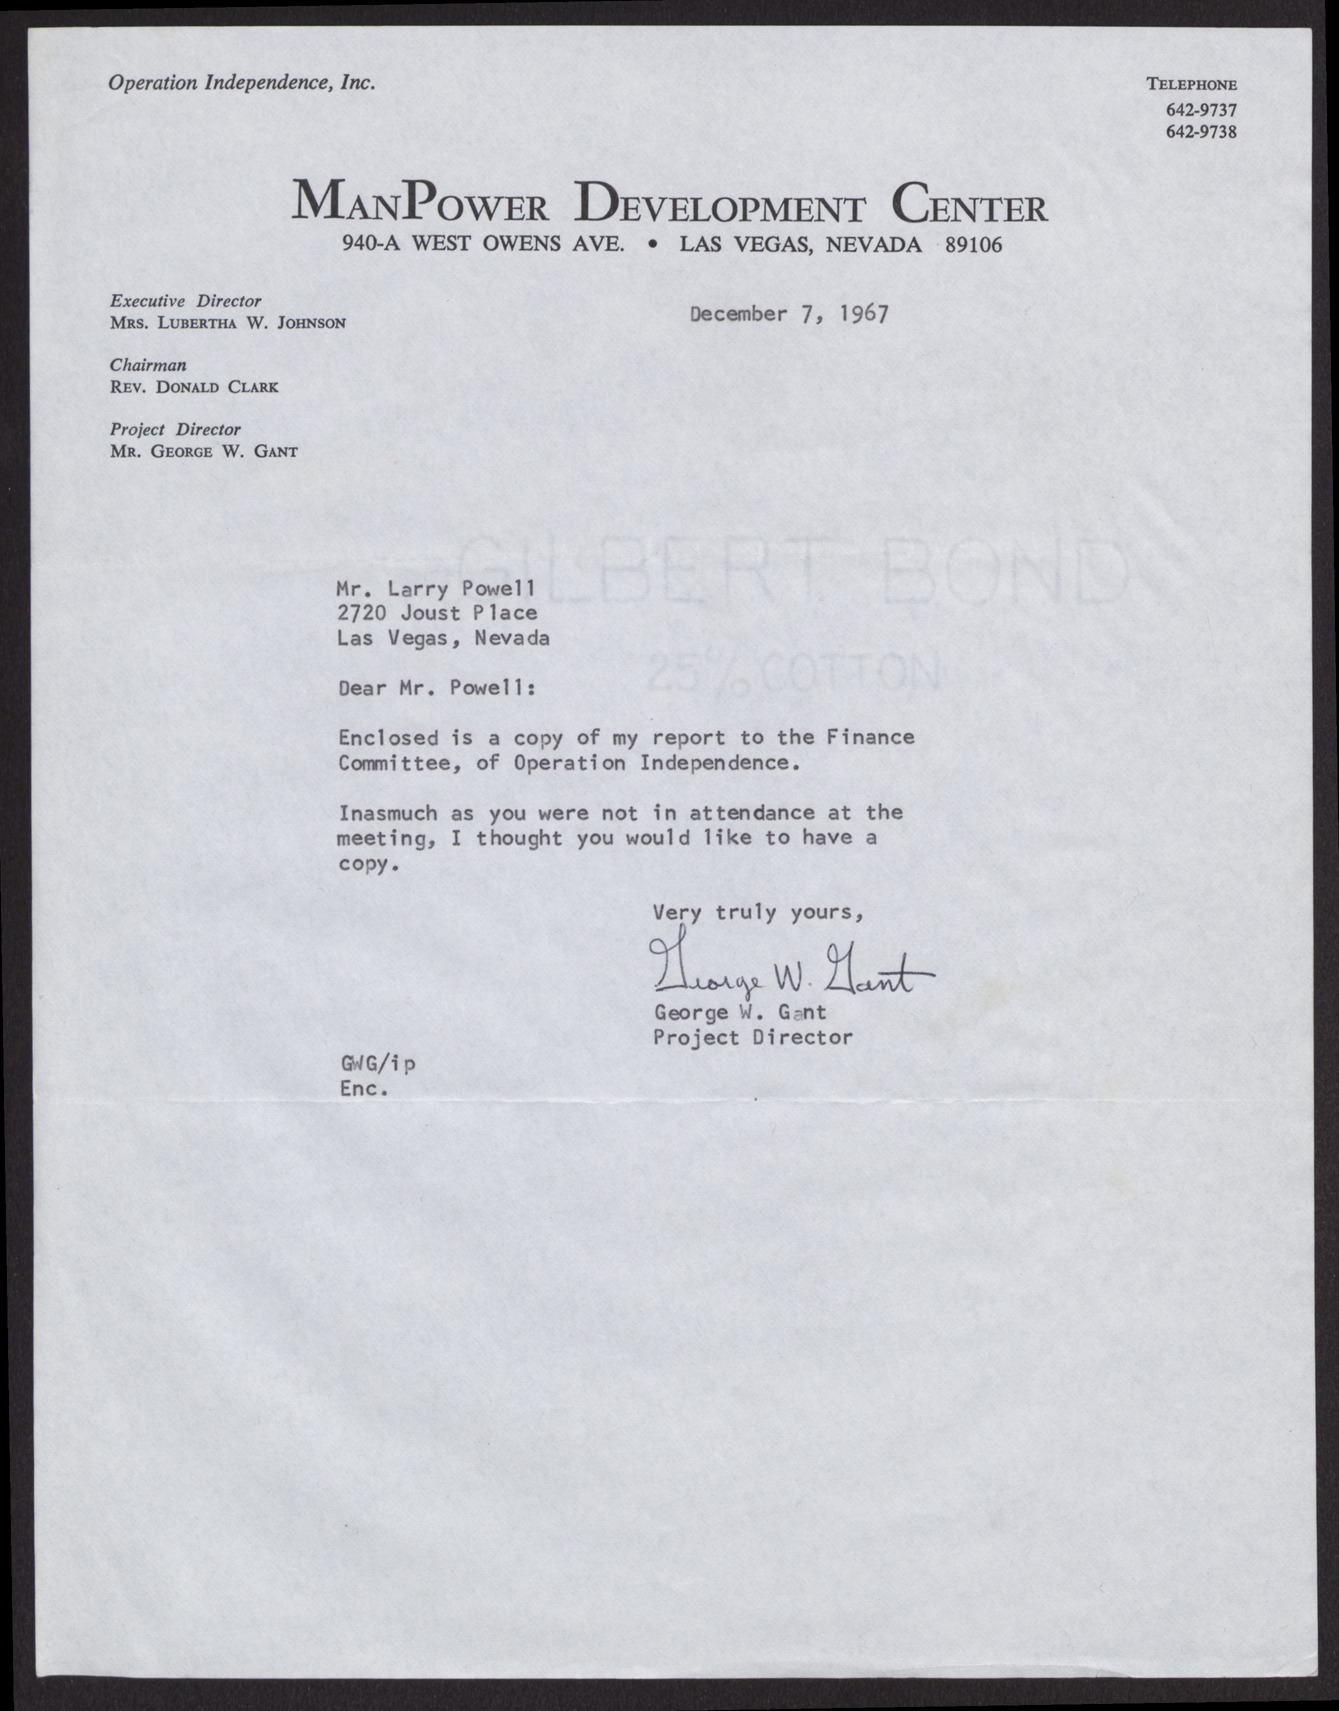 Letter to Mr. Larry Powell from George W. Gant, December 7, 1967